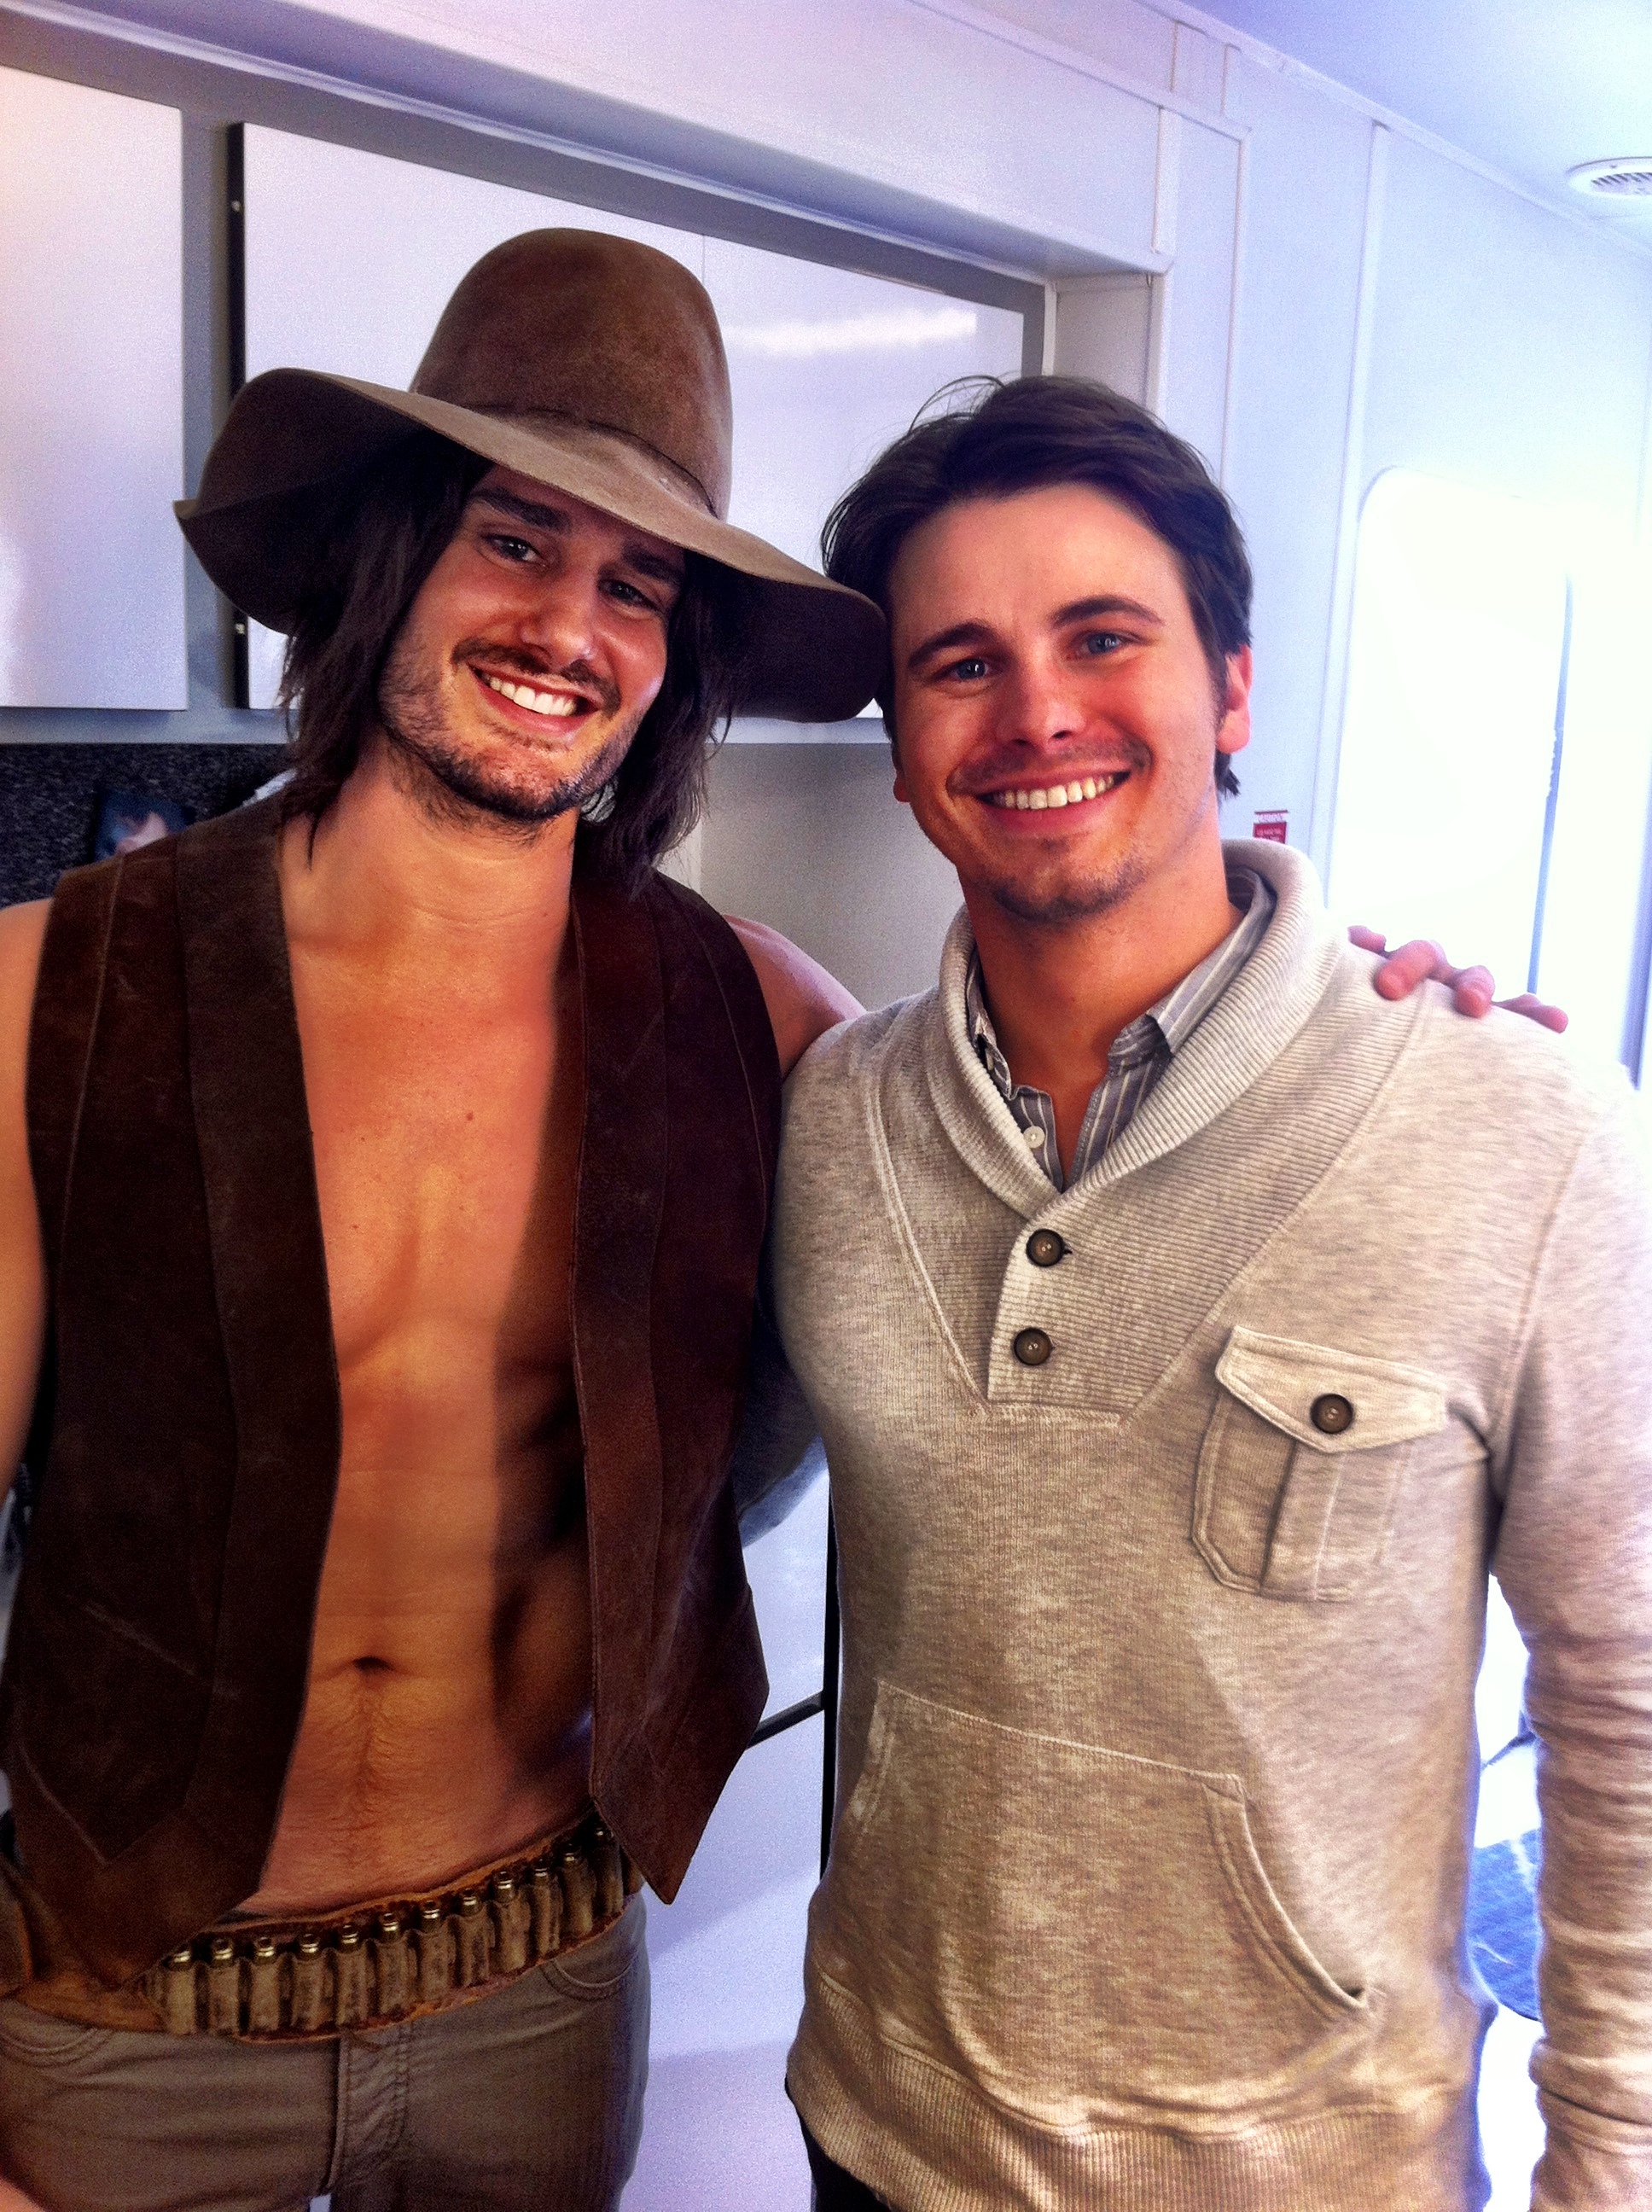 Edward Finlay (as Van Helsing) with Jason Ritter on the set of NTSF:SD:SUV.